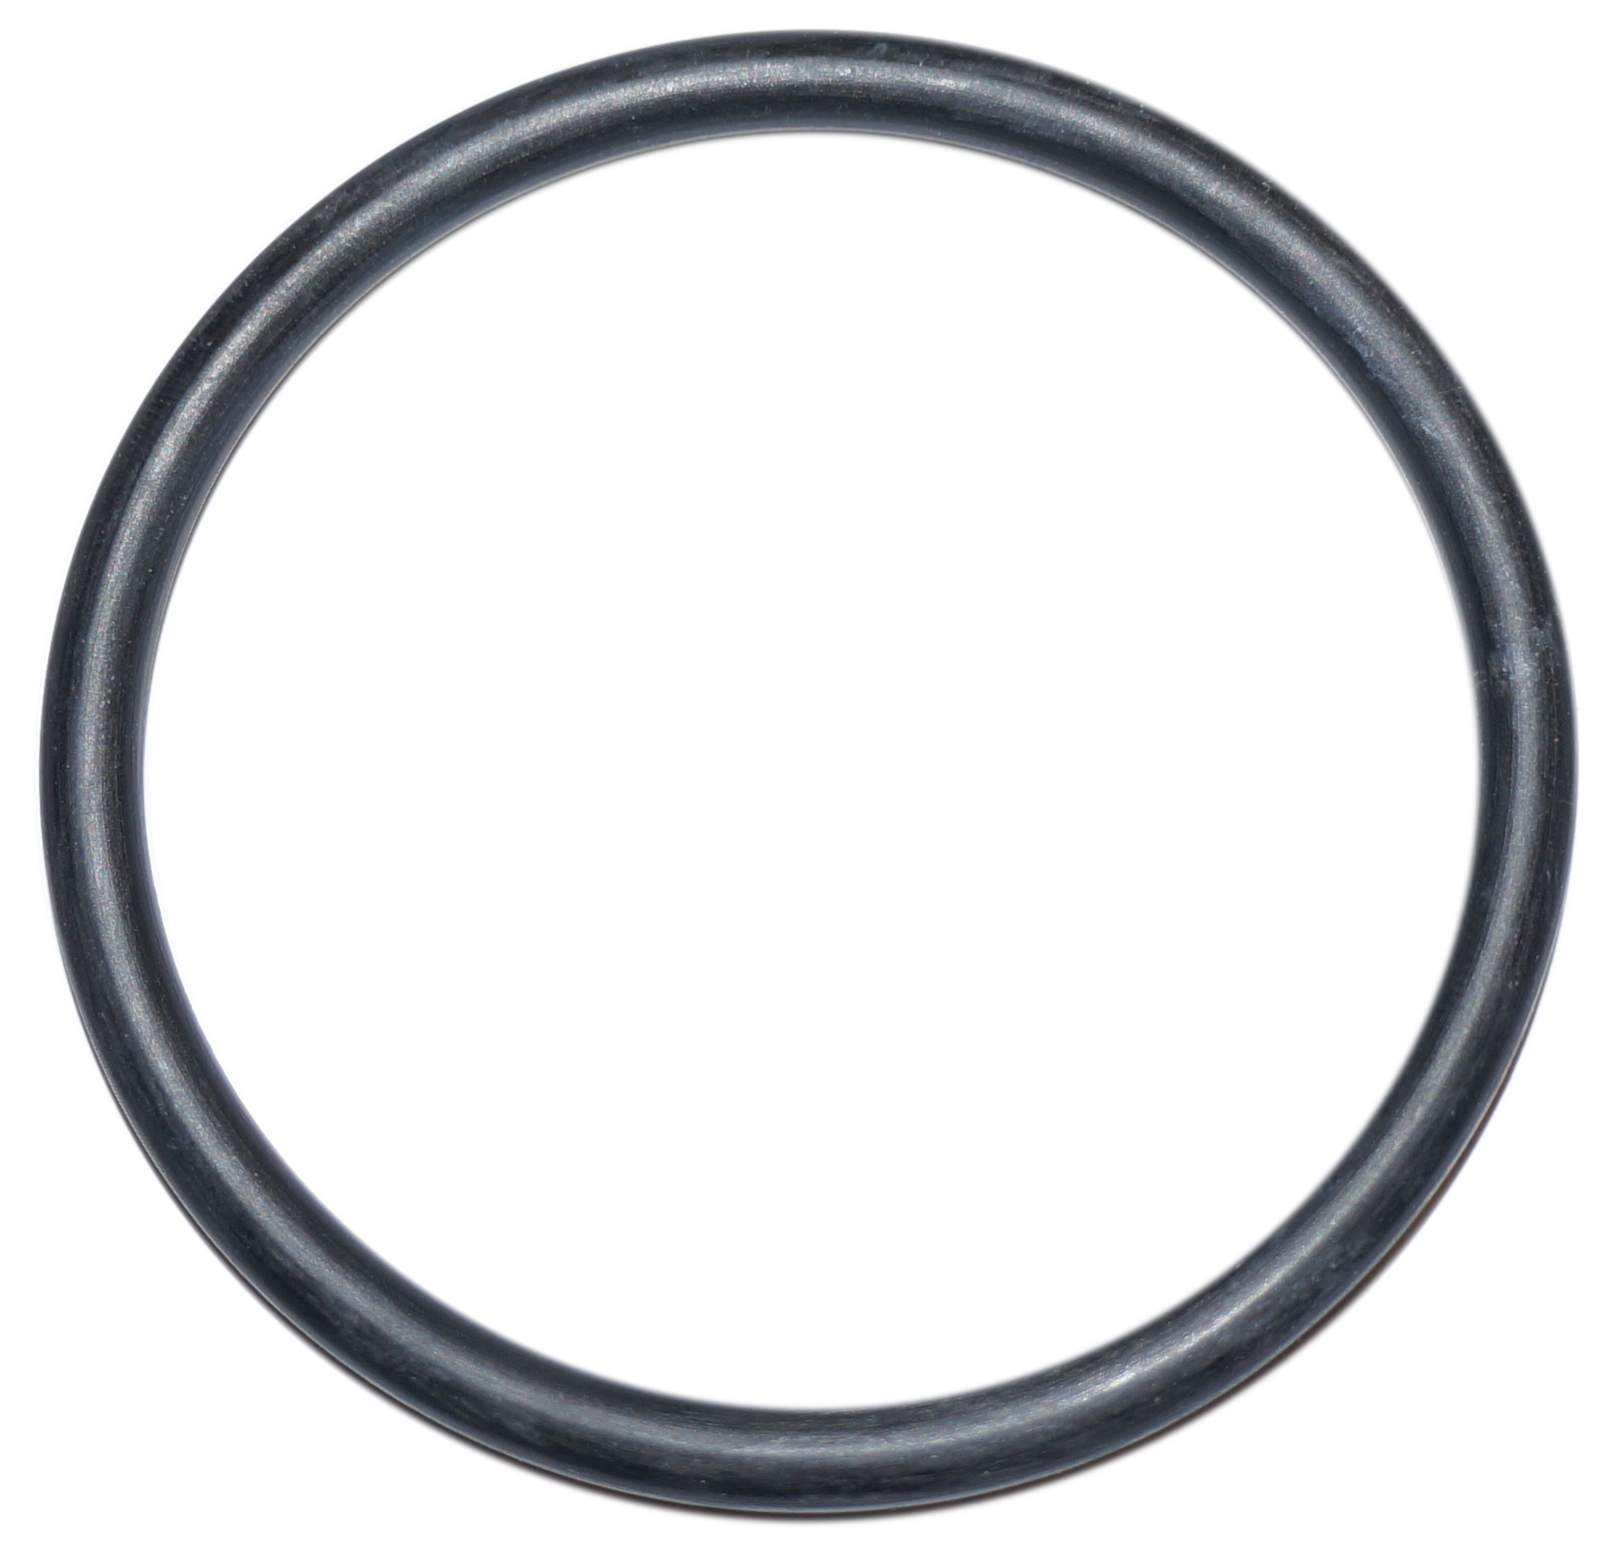 O-ring 90 mm diameter for Ardeche pool filter wall crossing